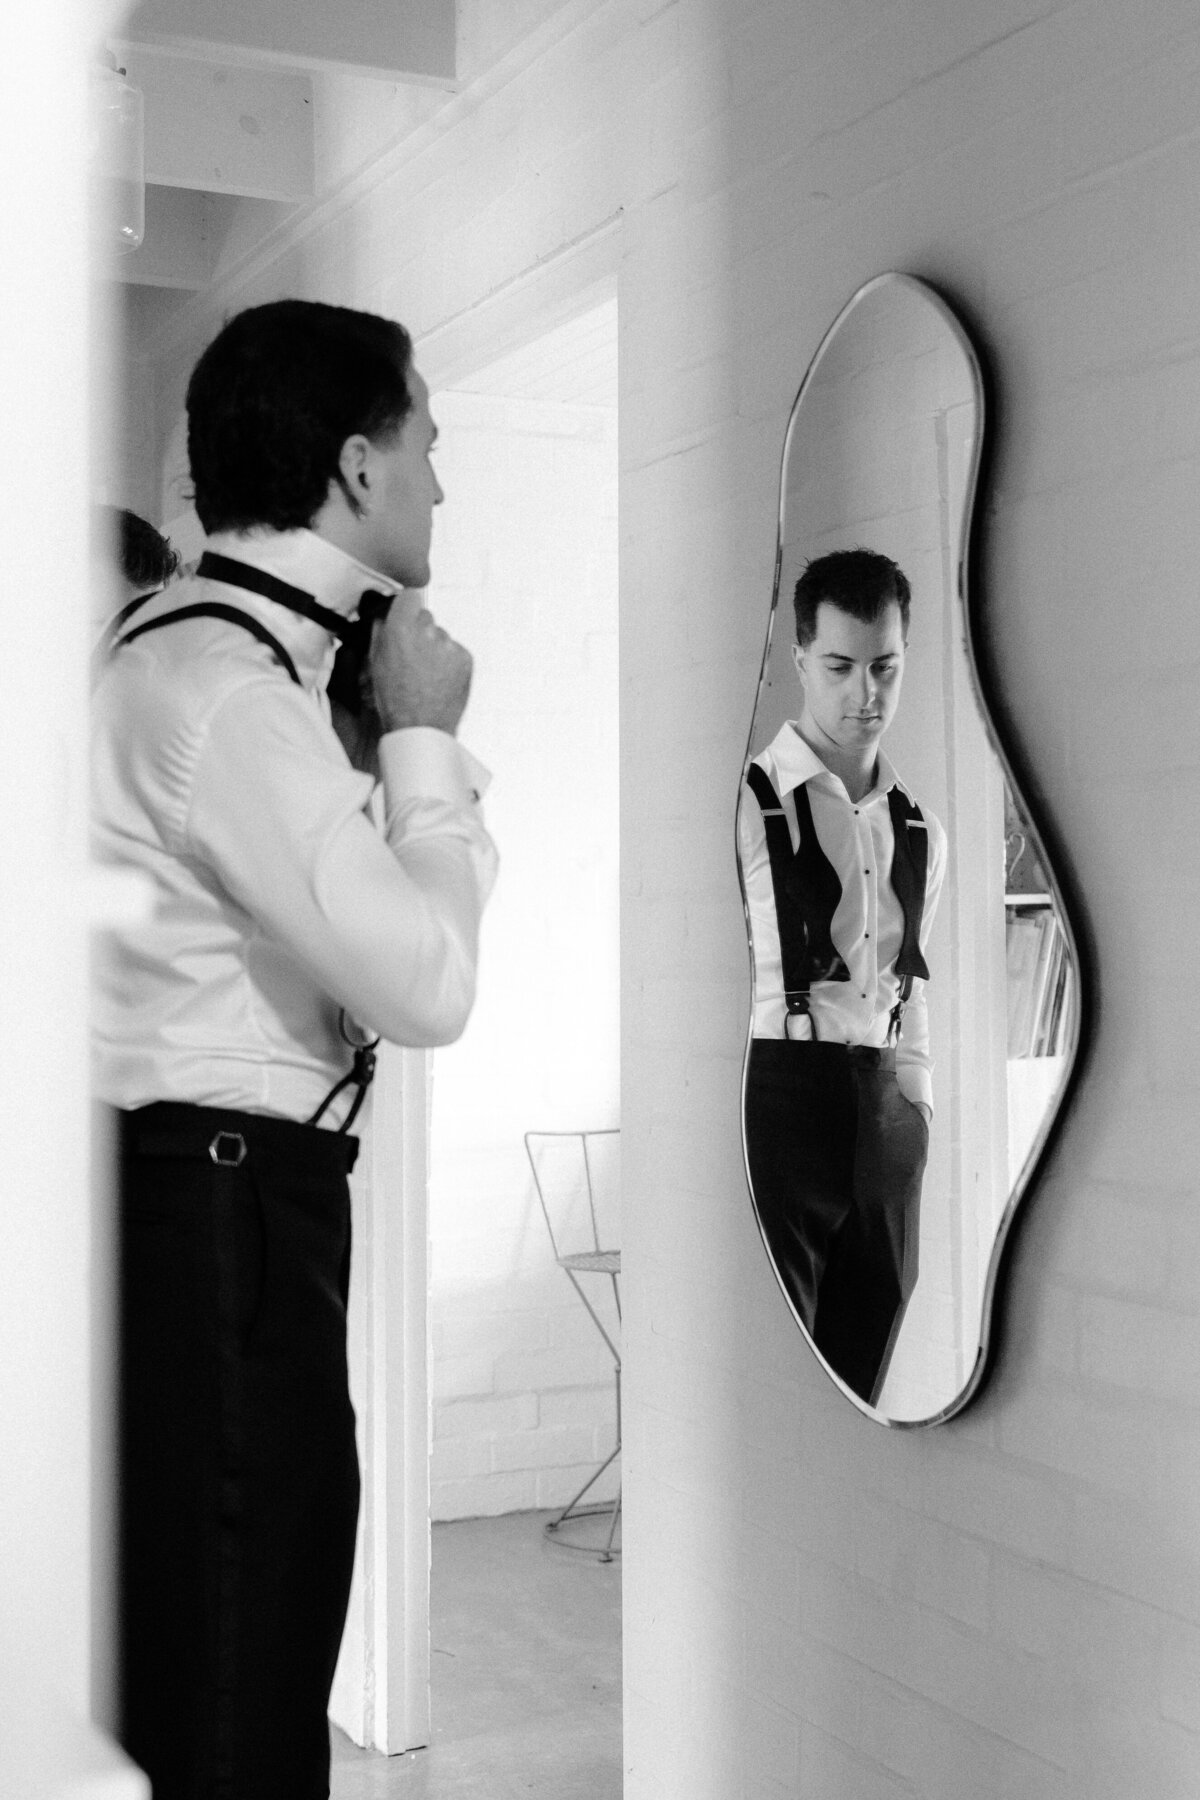 A groom wearing his bow tie in front of a mirror and his partner's reflection on the same mirror.